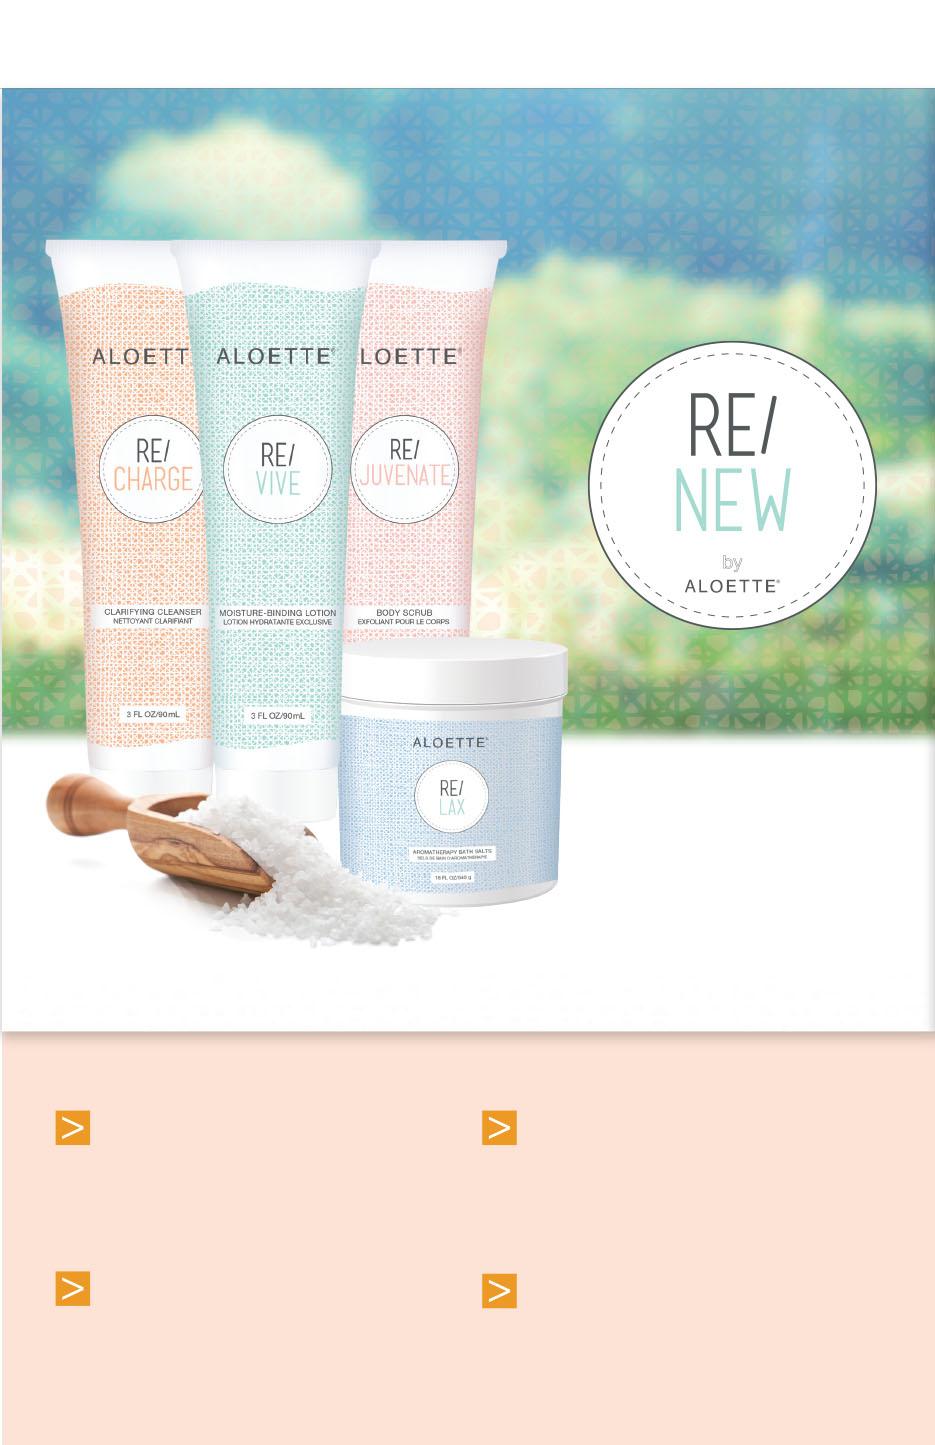 Re/New Re/ NEW by Detoxify the mind, body and soul with Aloette s Farm to Jar spa collection. When you Re/Charge, Re/Juvenate, Re/Vive and Re/Lax you reawaken your best self. Buy now. Thank us later.